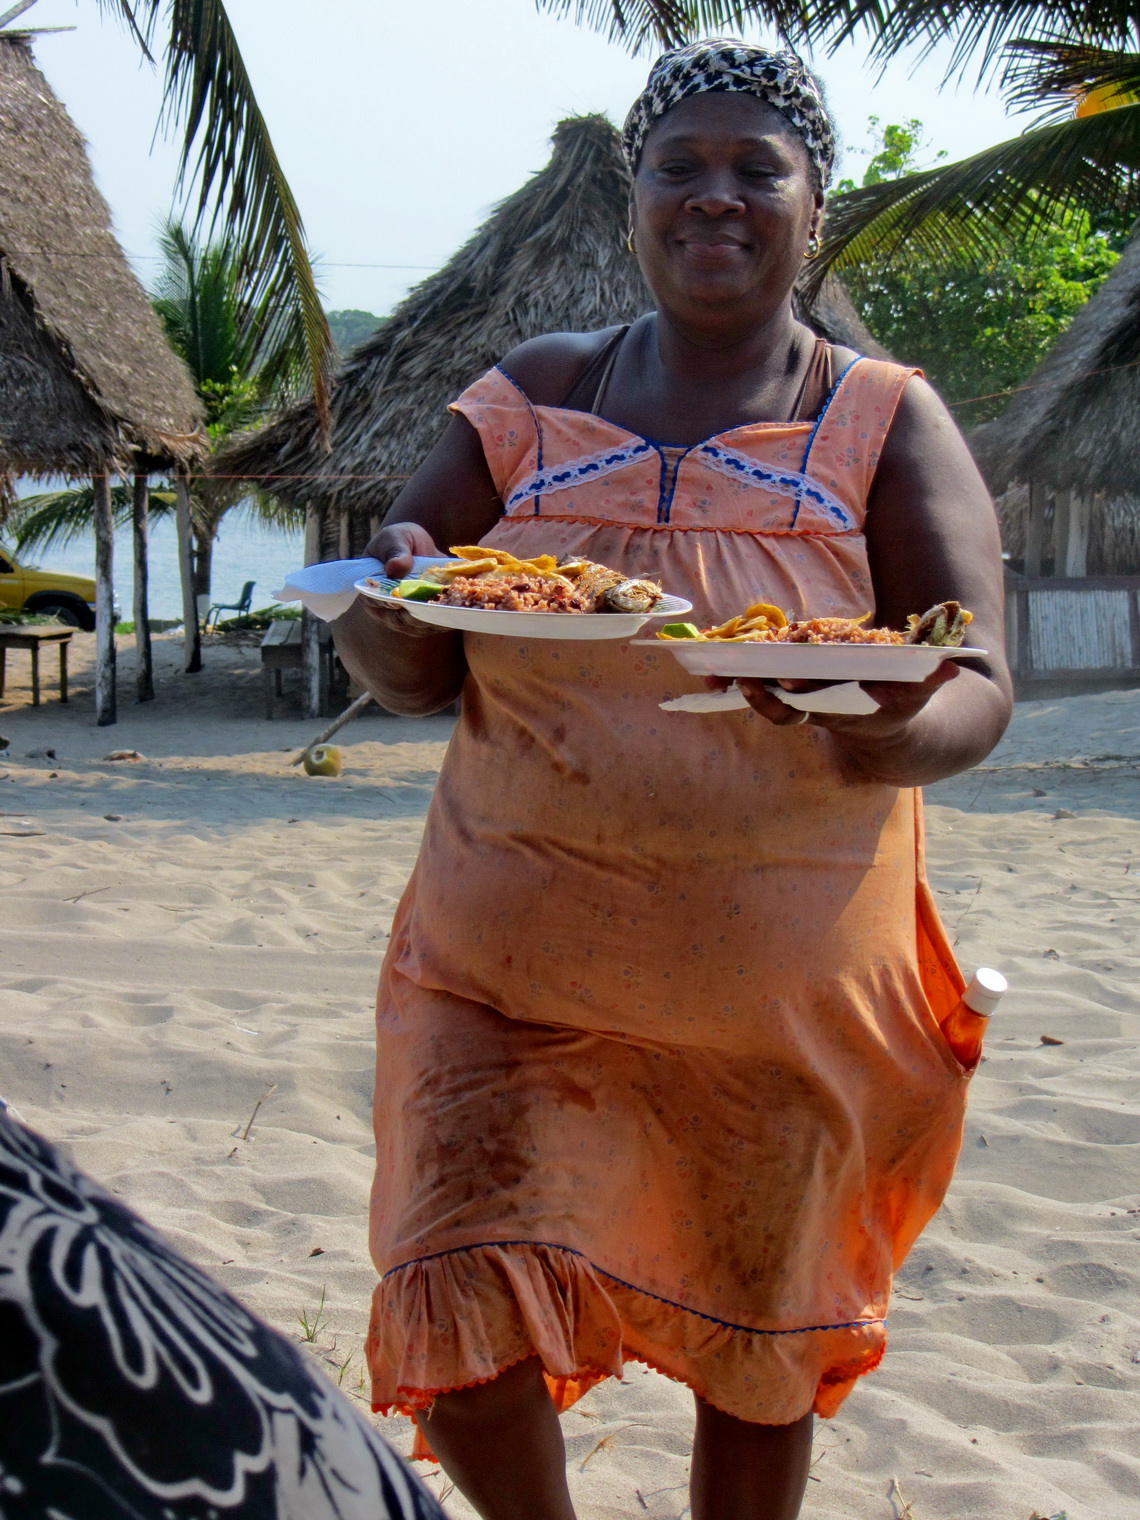 We were hungry like wolves when we came to Miami - African Lady serving us delicious food